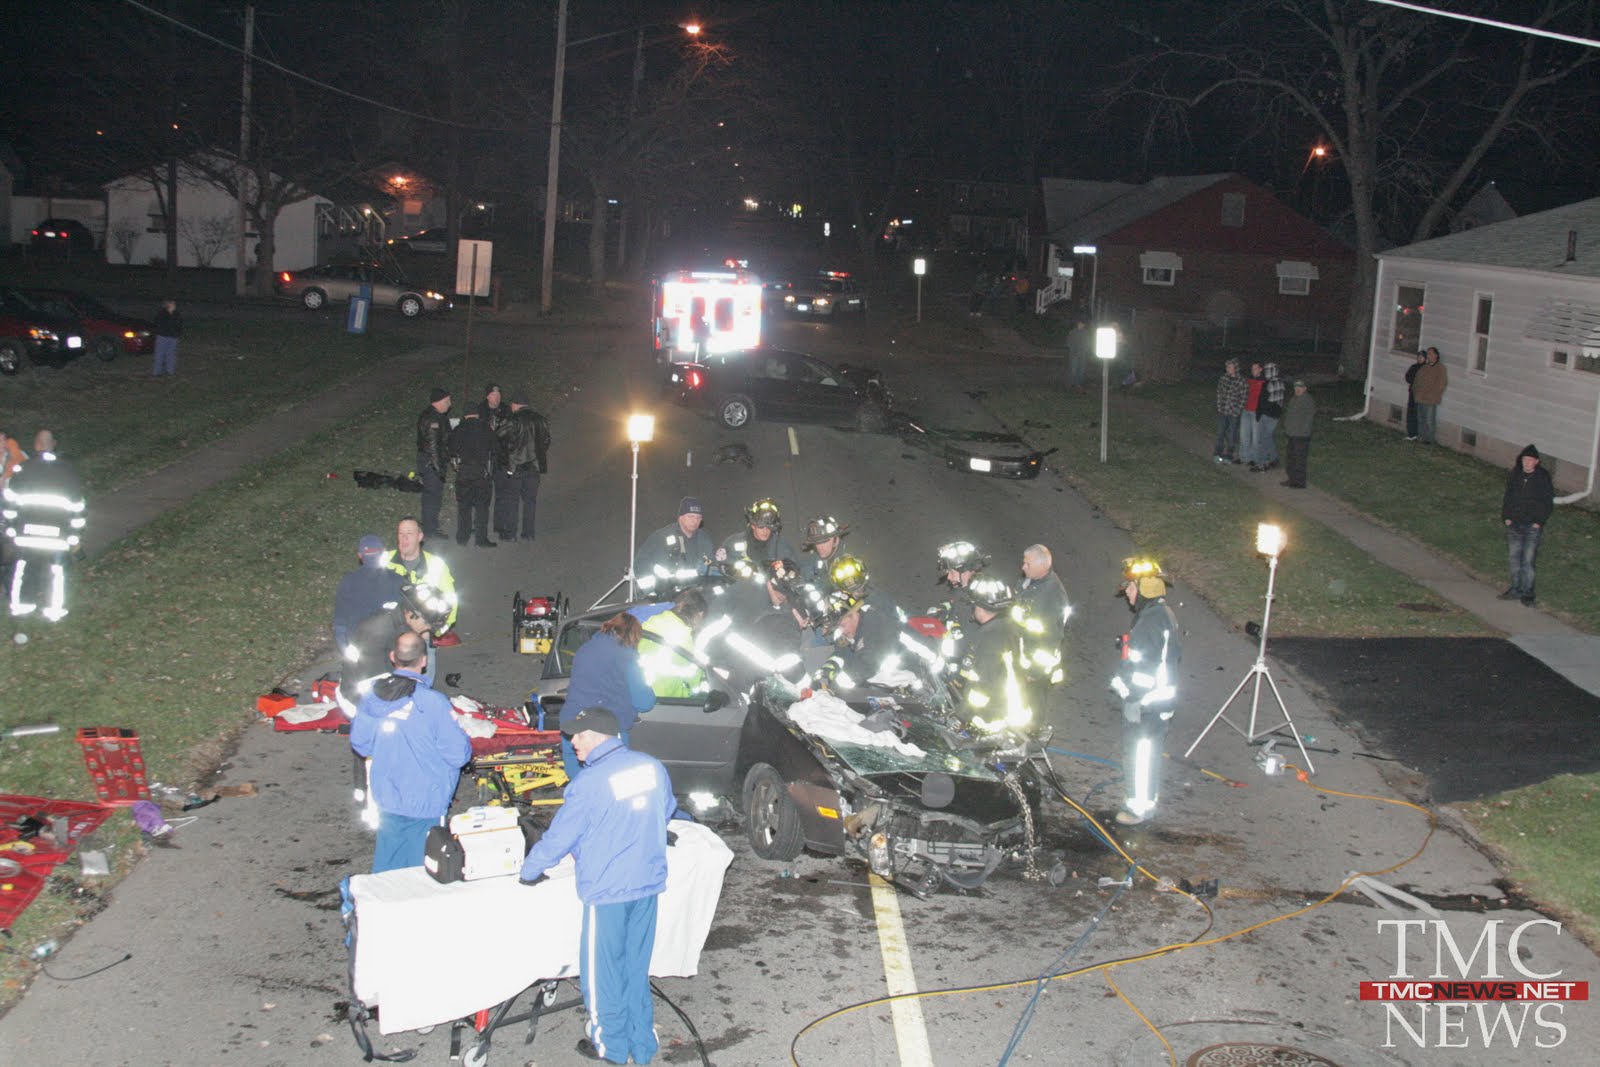 20 killed in horrific limo crash in upstate New York